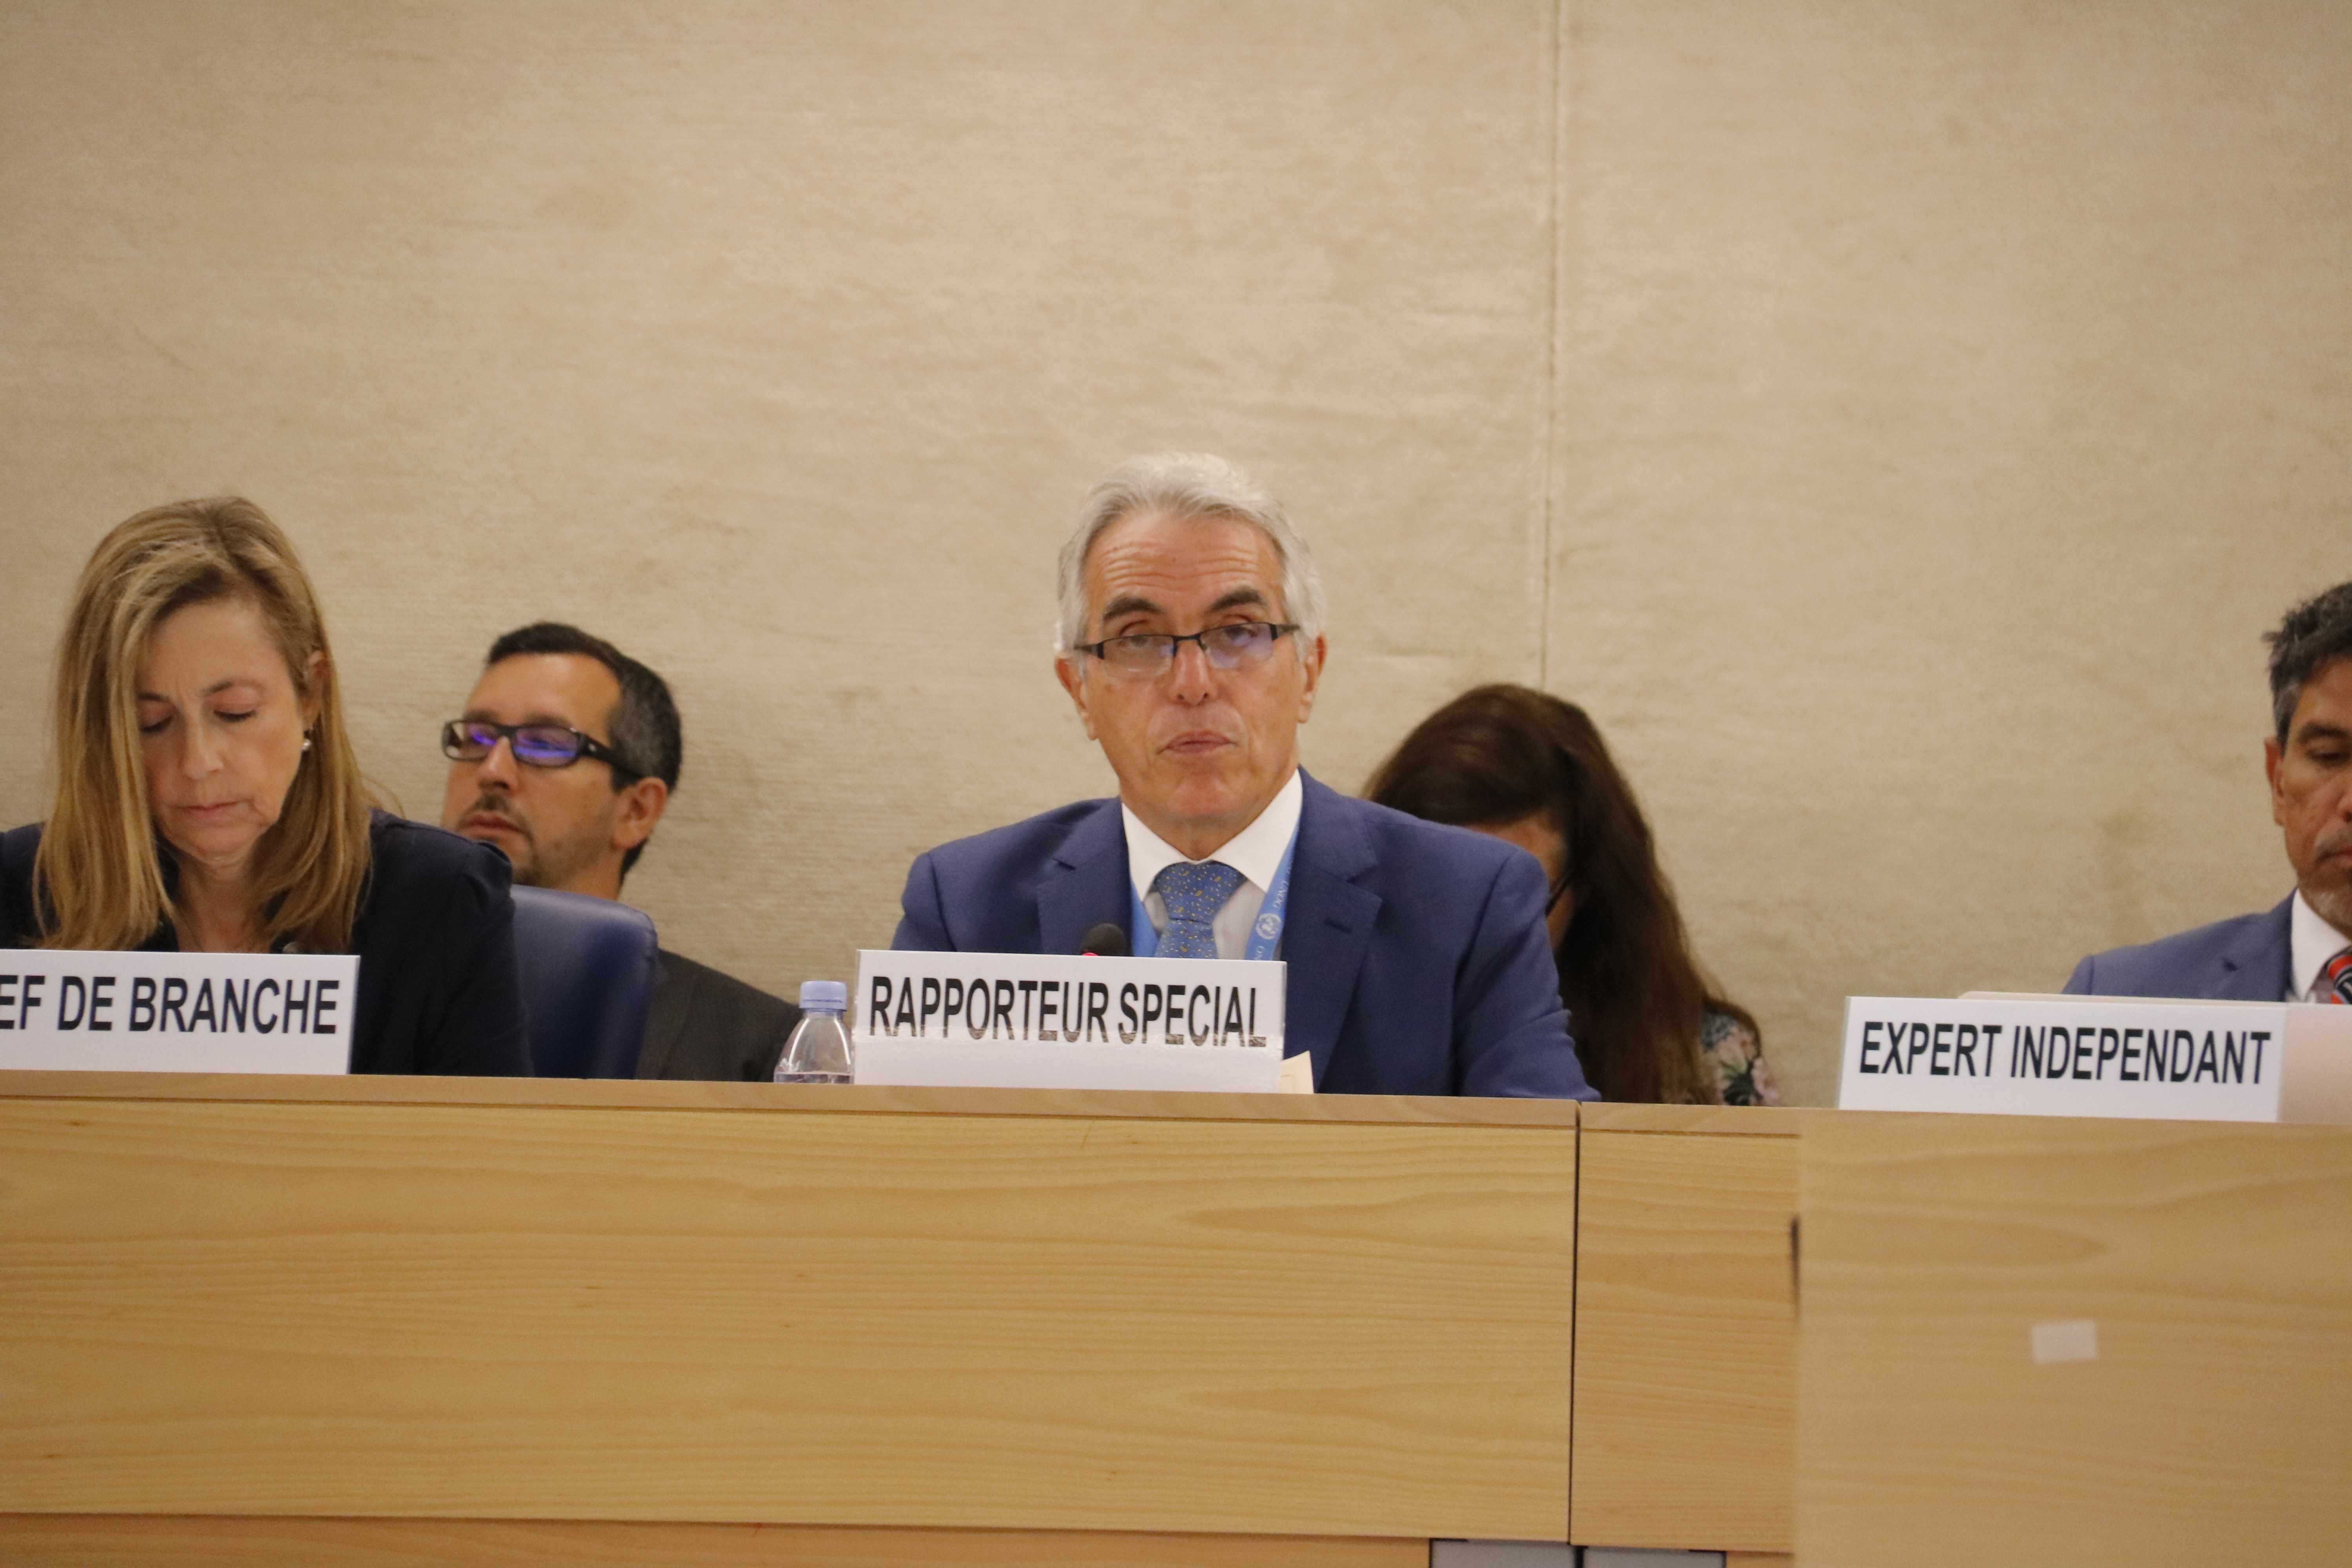 UN Special Rapporteur on the Independence of Judges and Lawyers Diego García-Sayán in Geneva on June 24, 2019 (by Natàlia Segura)